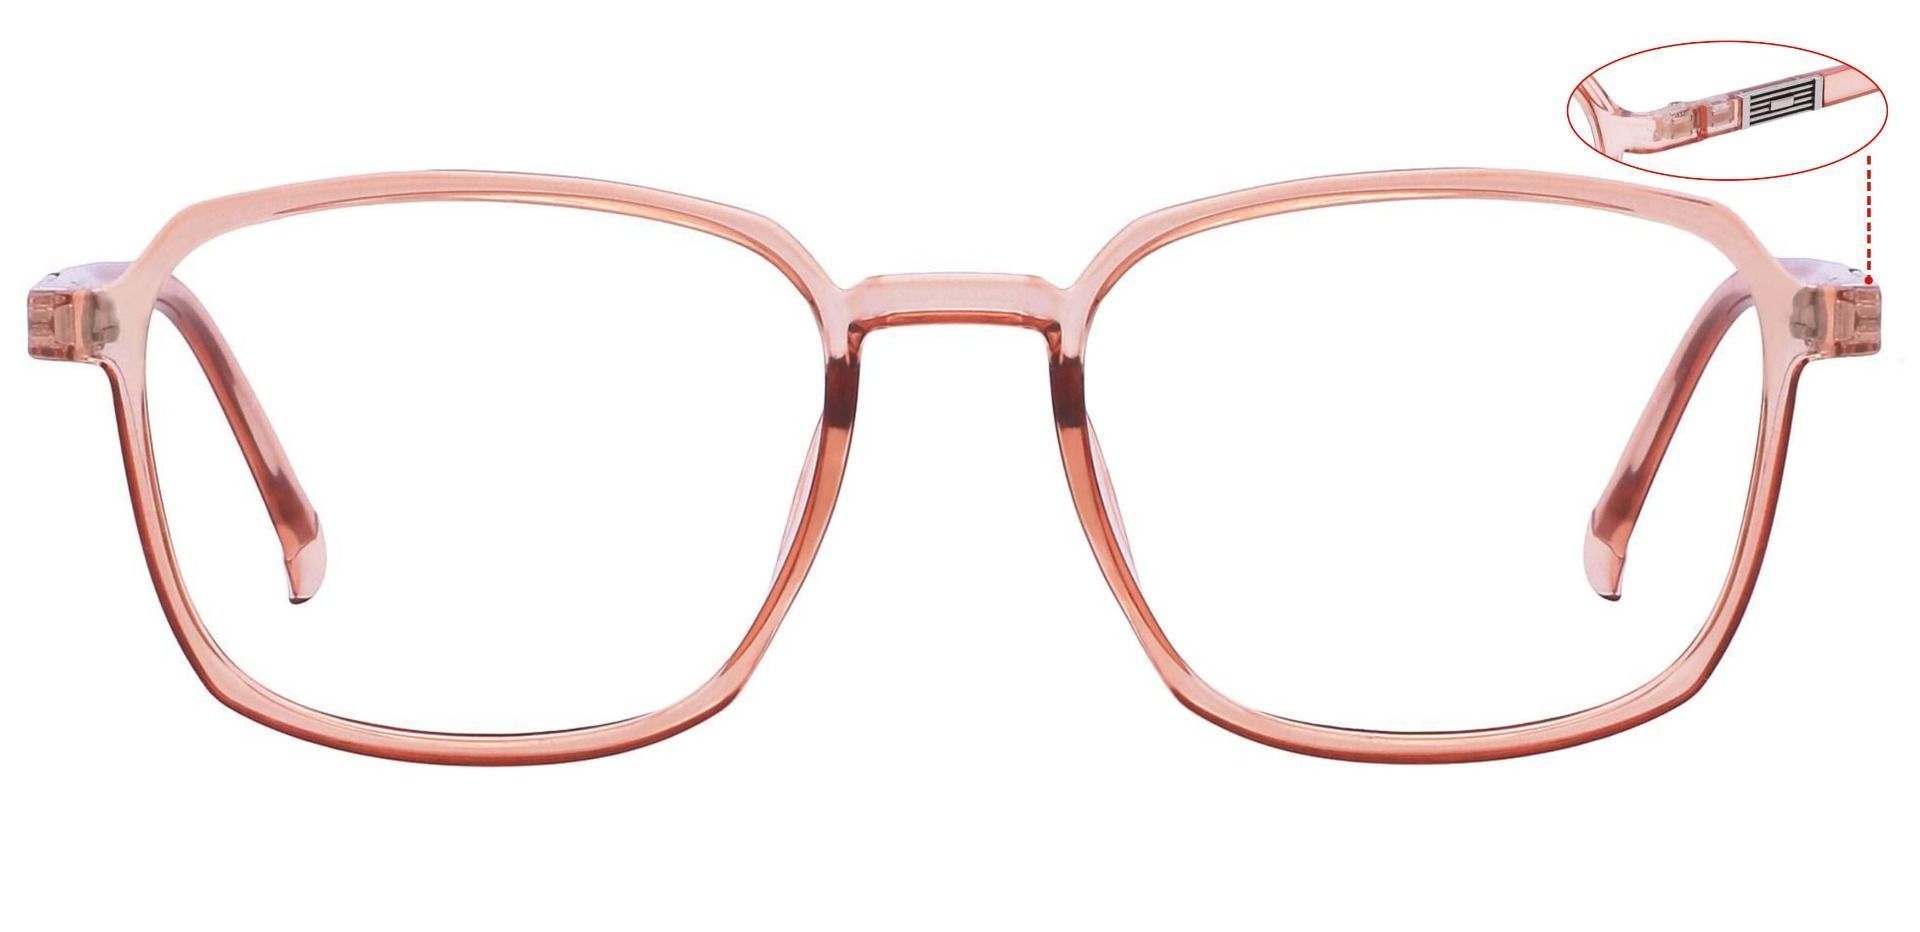 Stella Square Non-Rx Glasses - The Frame Is Red And Clear